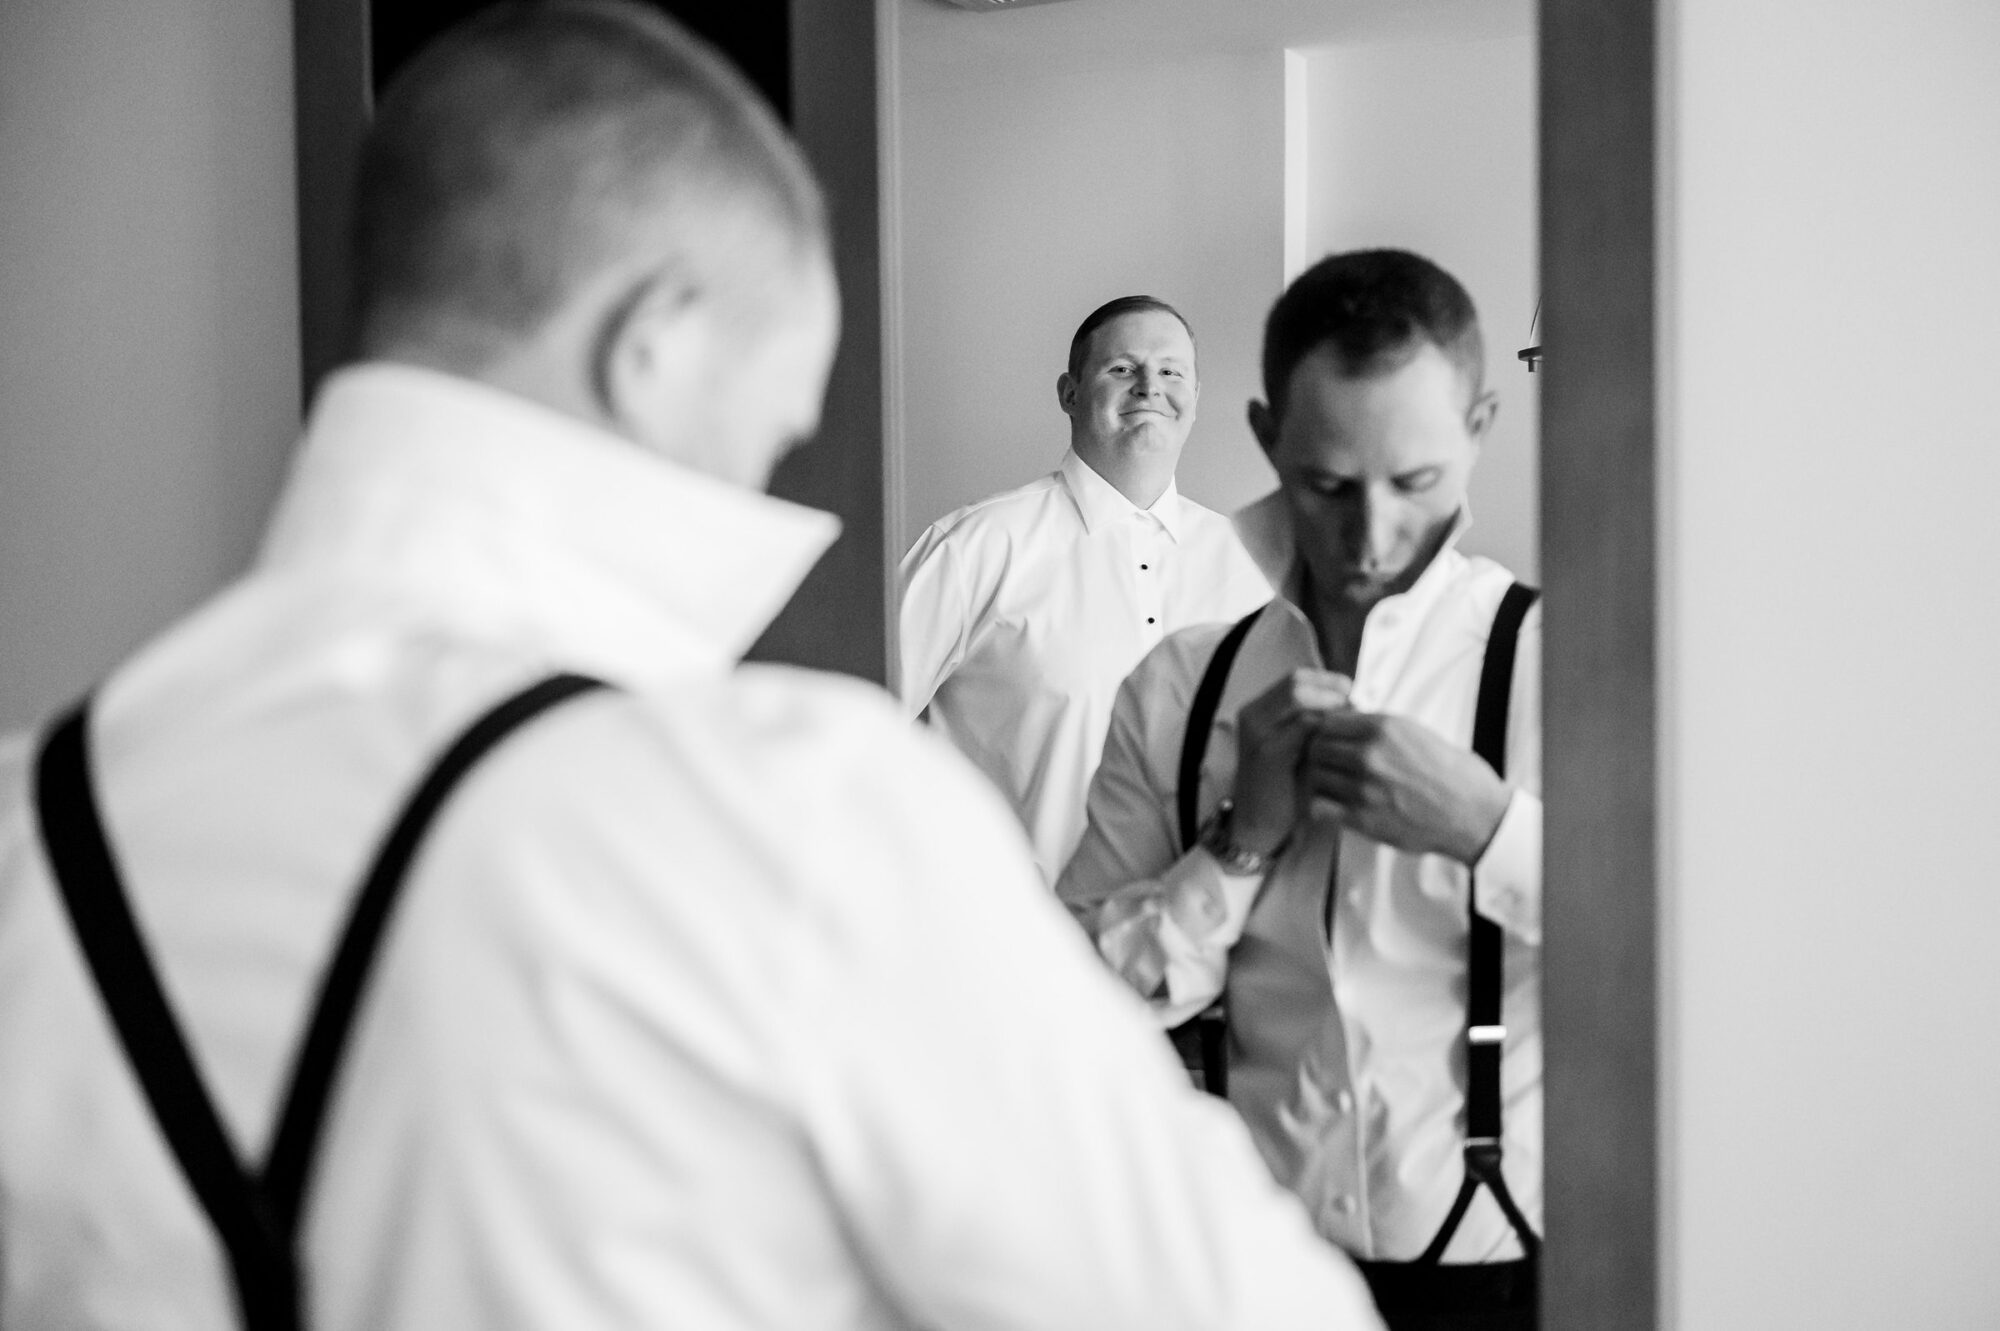 A man is putting on his suspenders in front of a mirror.